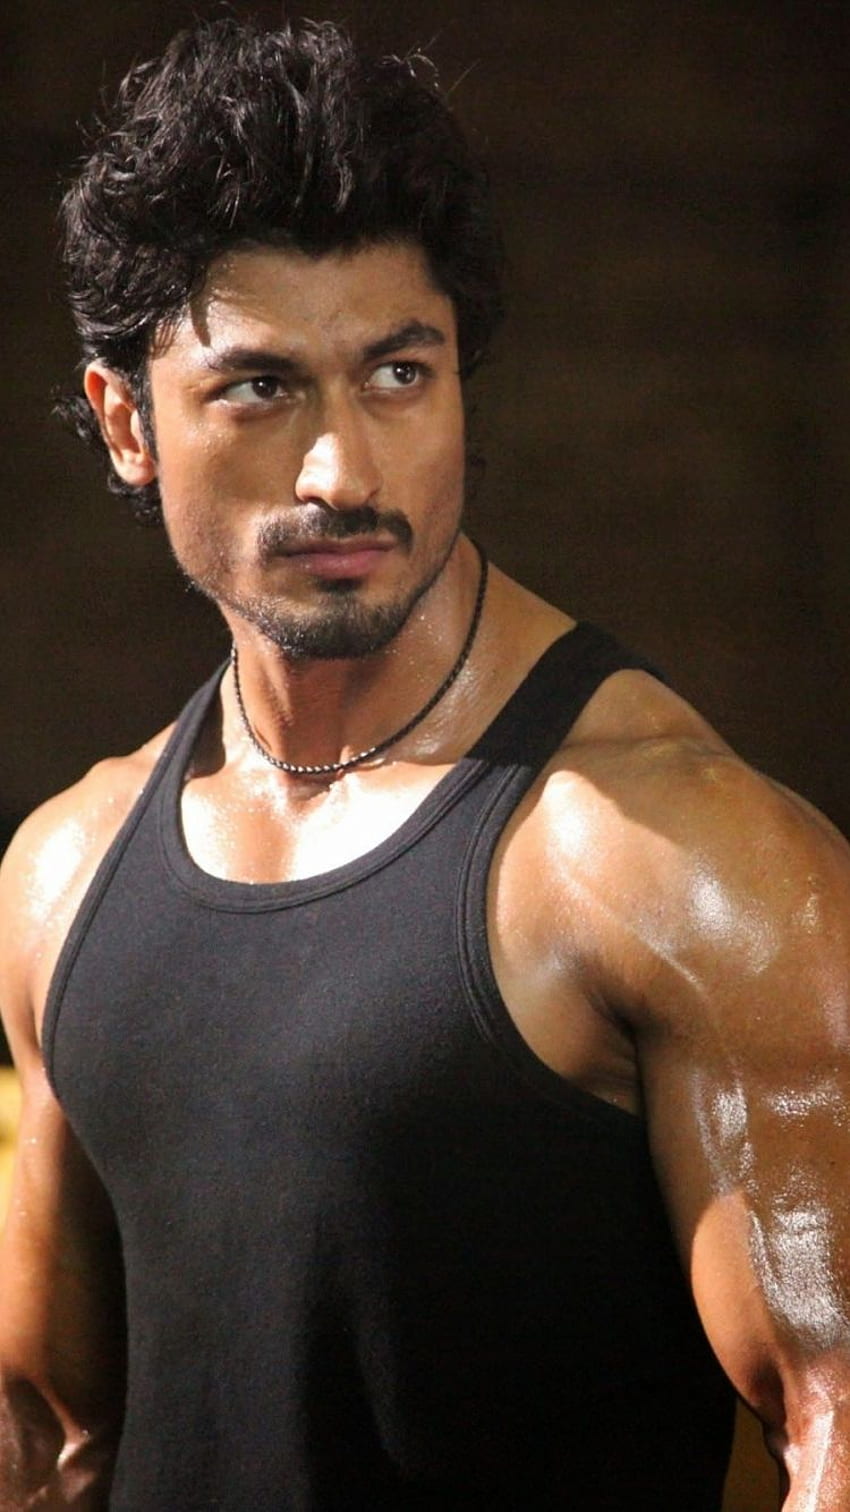 Vidyut Jammwal on Bollywood's nepotism row: 'You should shine so bright  that they can't ignore you' – Firstpost